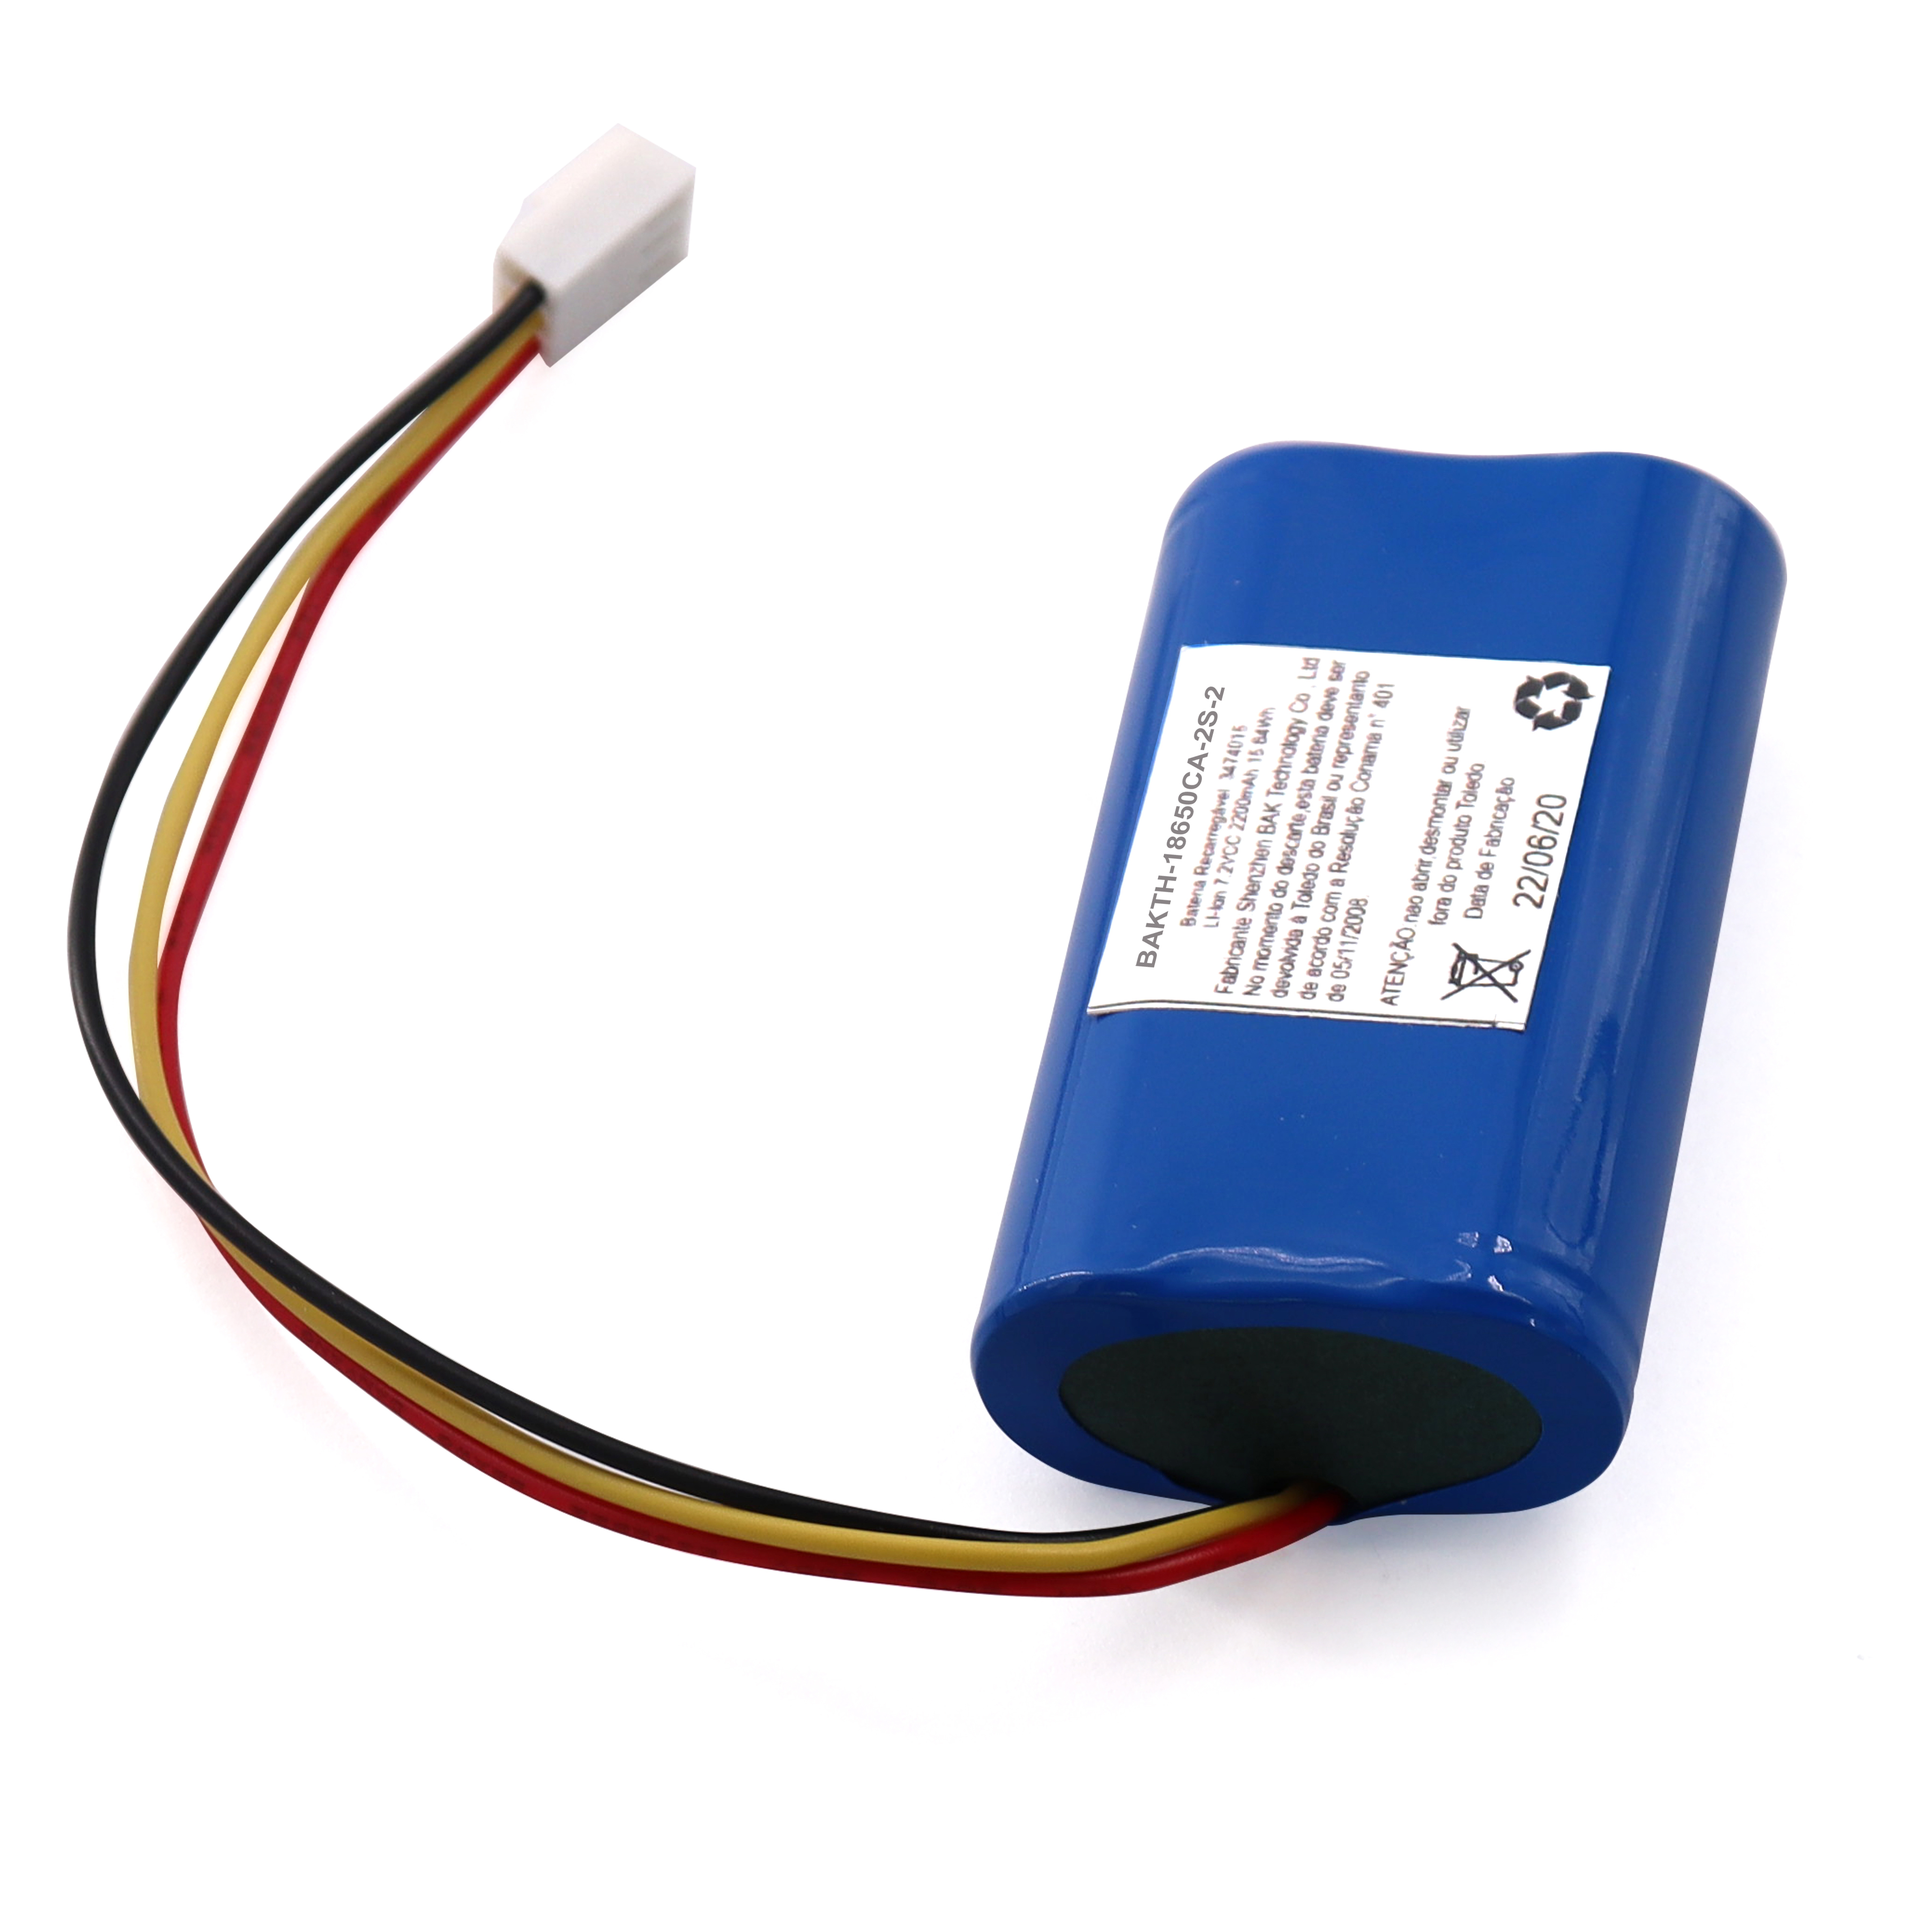 Batterie Lithium Ion Battery 7.2V 2200mAh 18650 2S1P pour Wheelers / E-Bike / Scooters